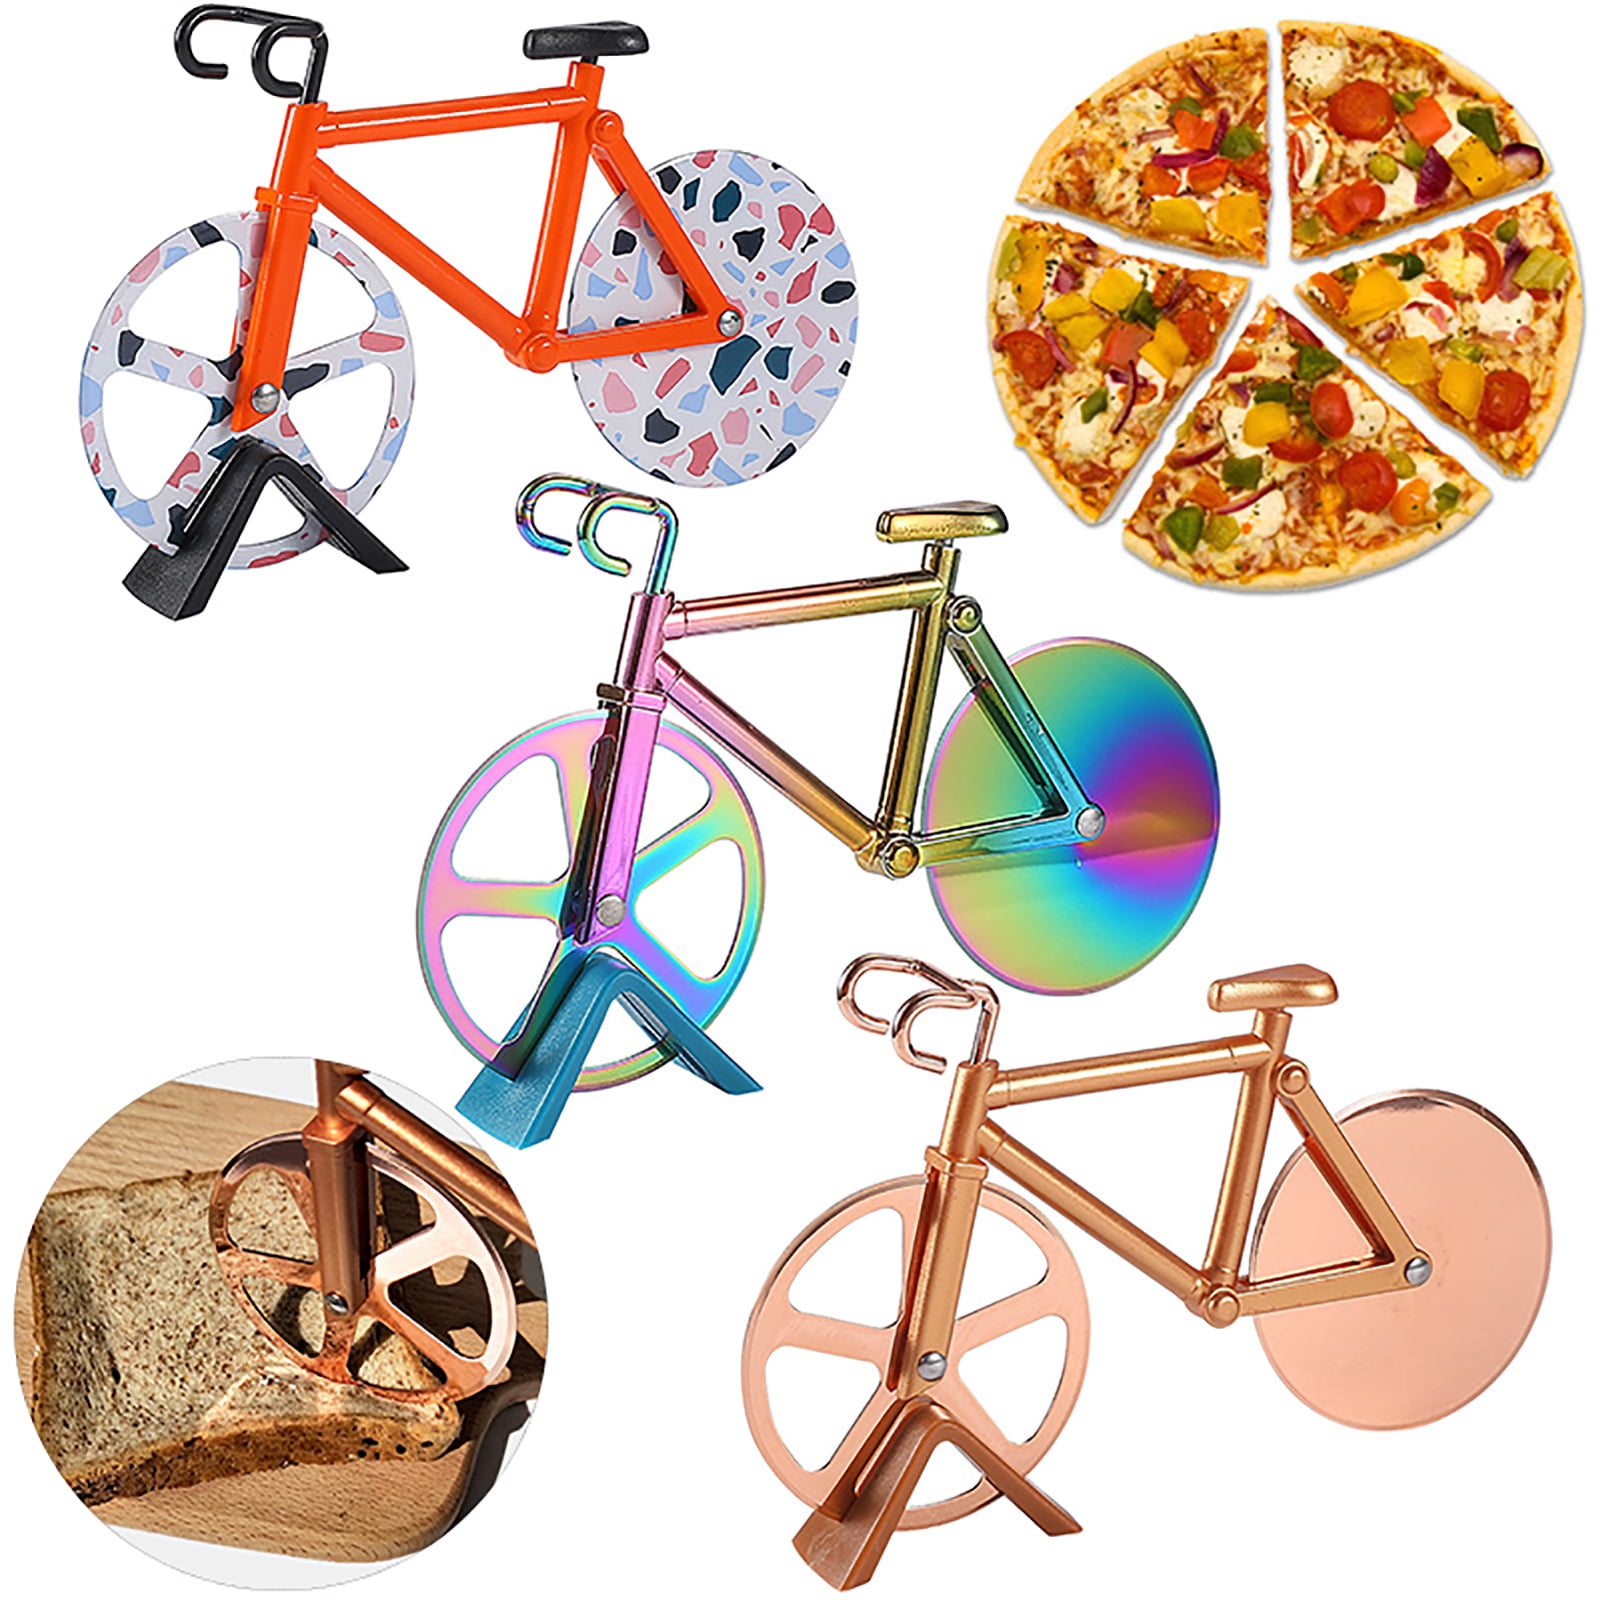 Bike Wheel Pizza Cutter with Dual Blades